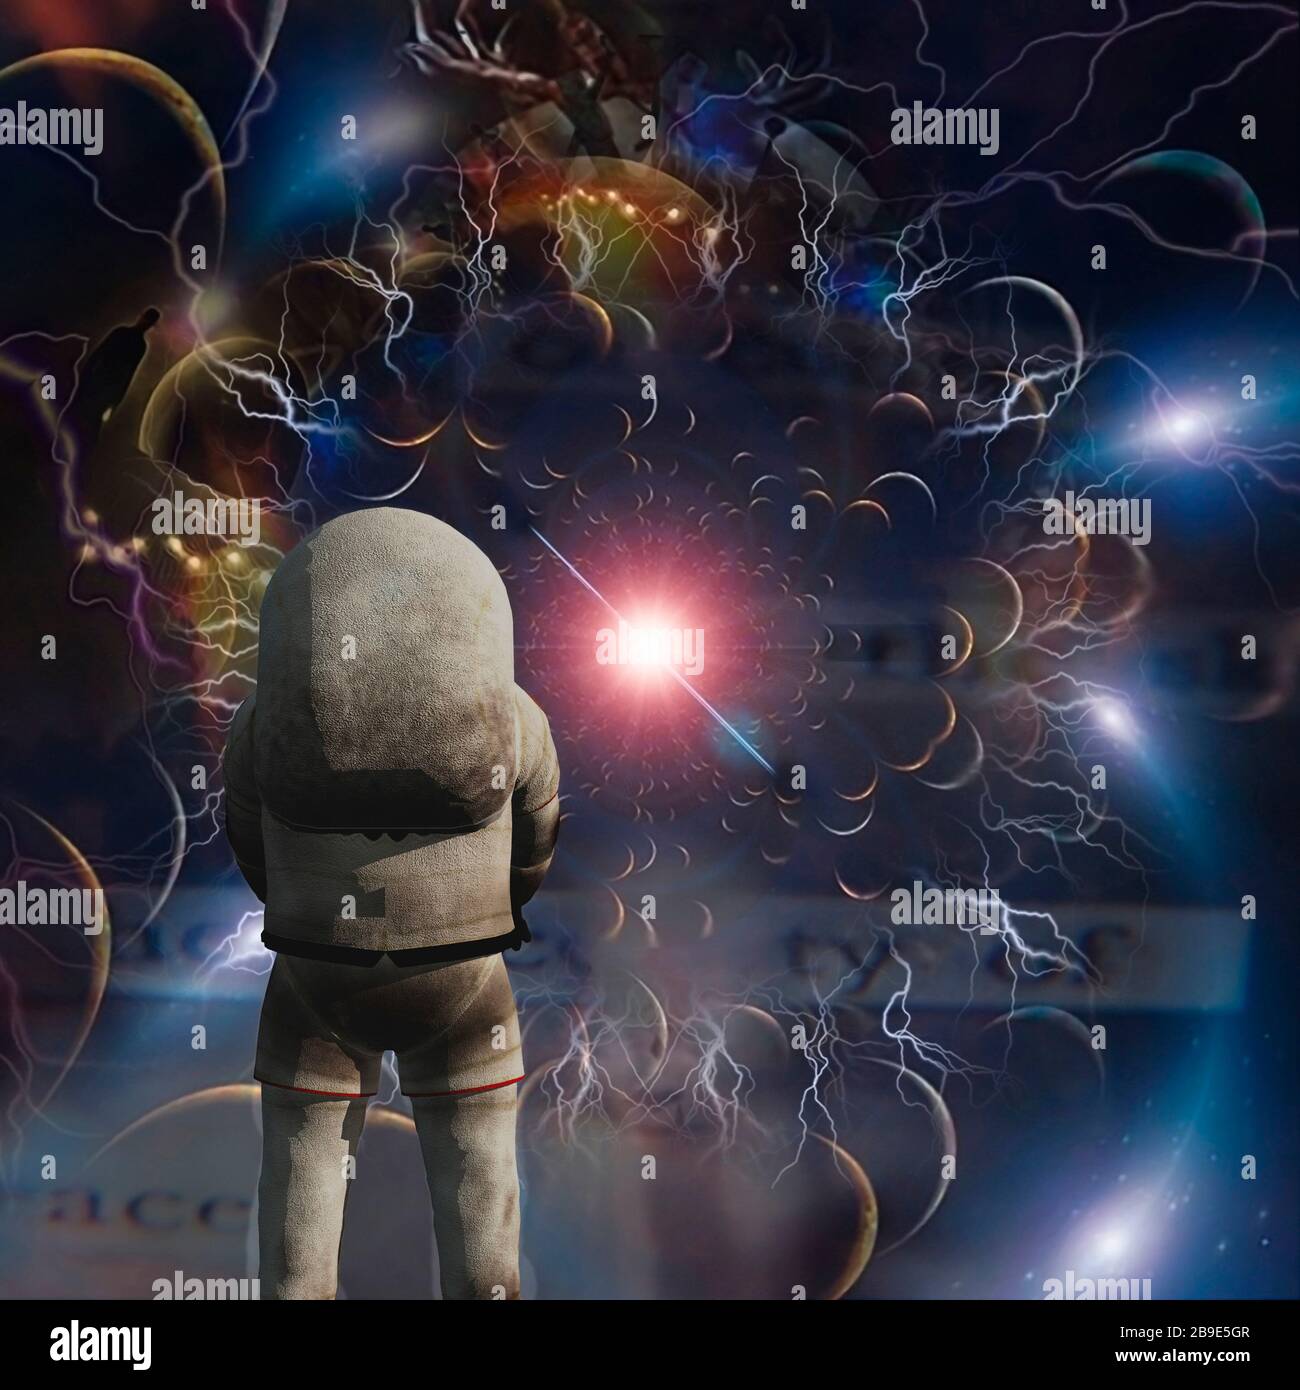 Astronaut in surreal composition, with supernova. Stock Photo